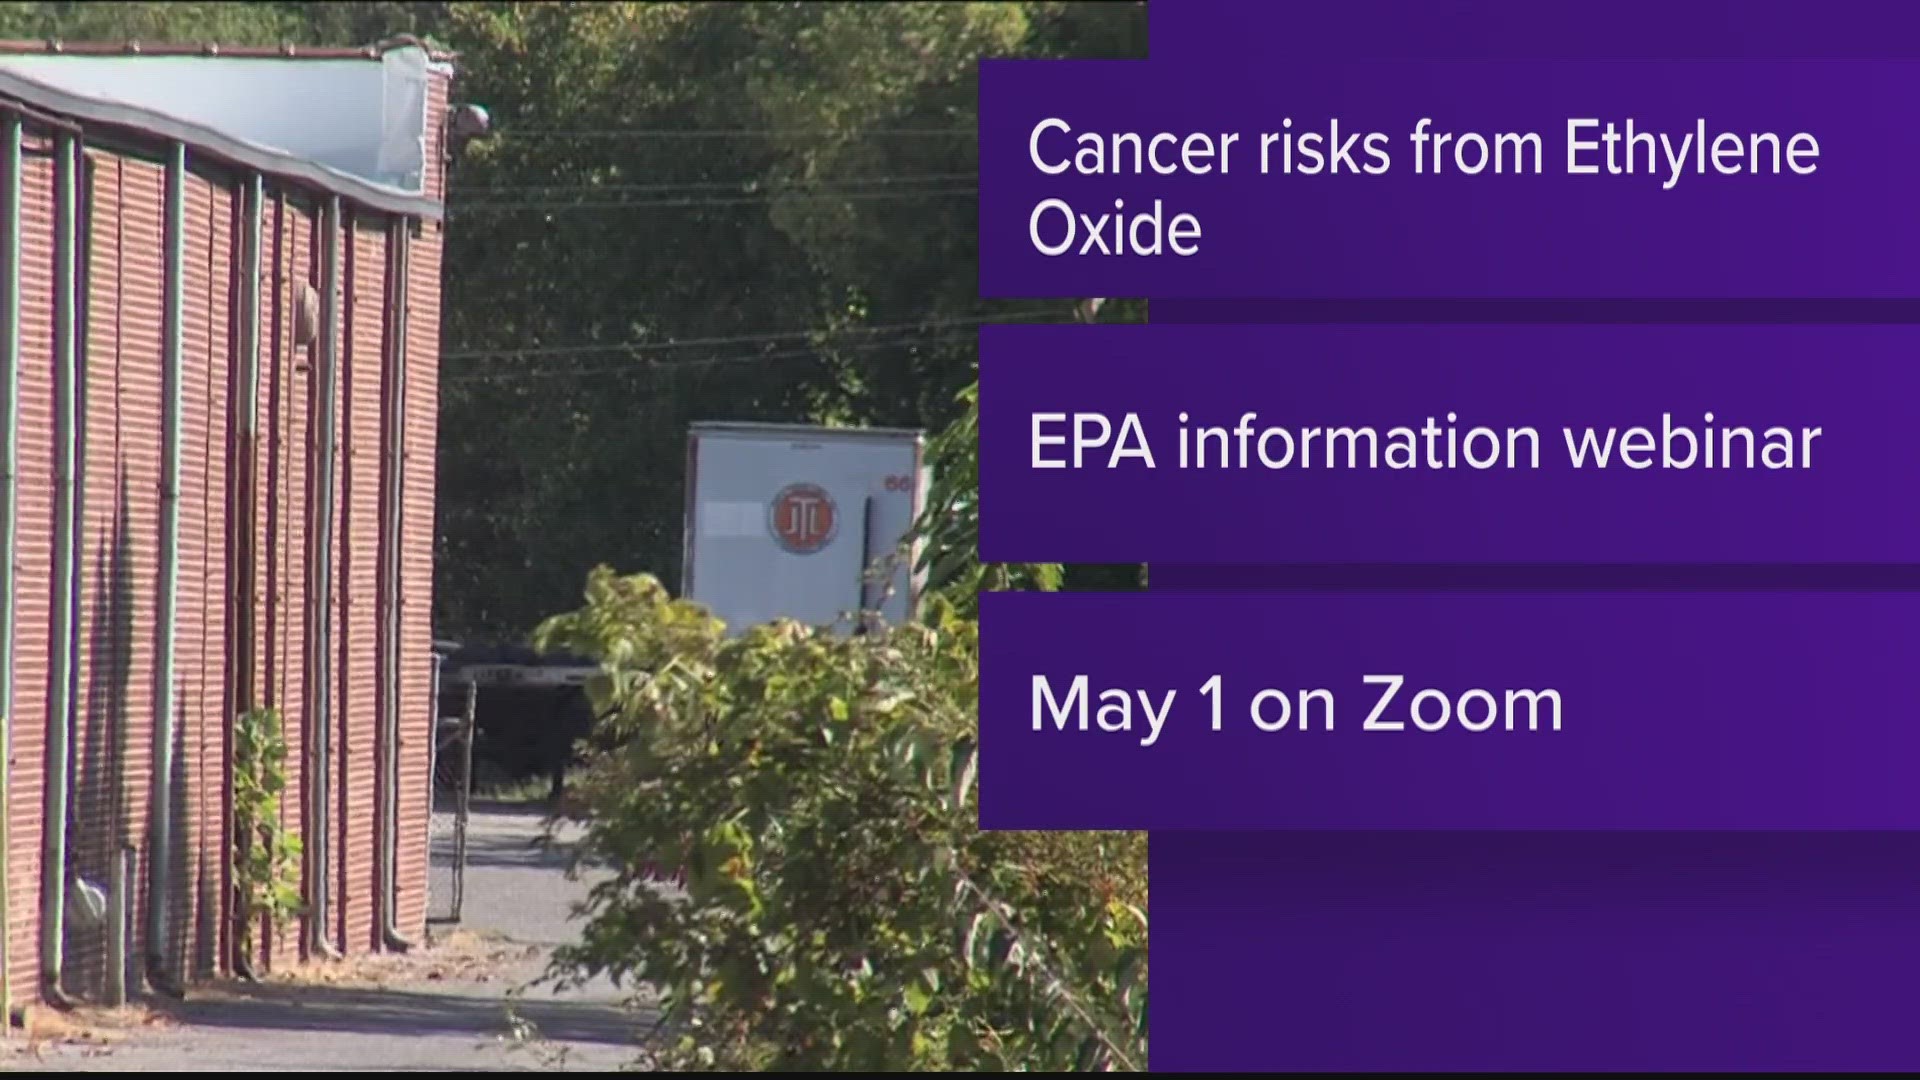 The Shelby County Health Department said the EPA’s public informational webinar will be held vis Zoom on May 1, 2023. Online registration is required.